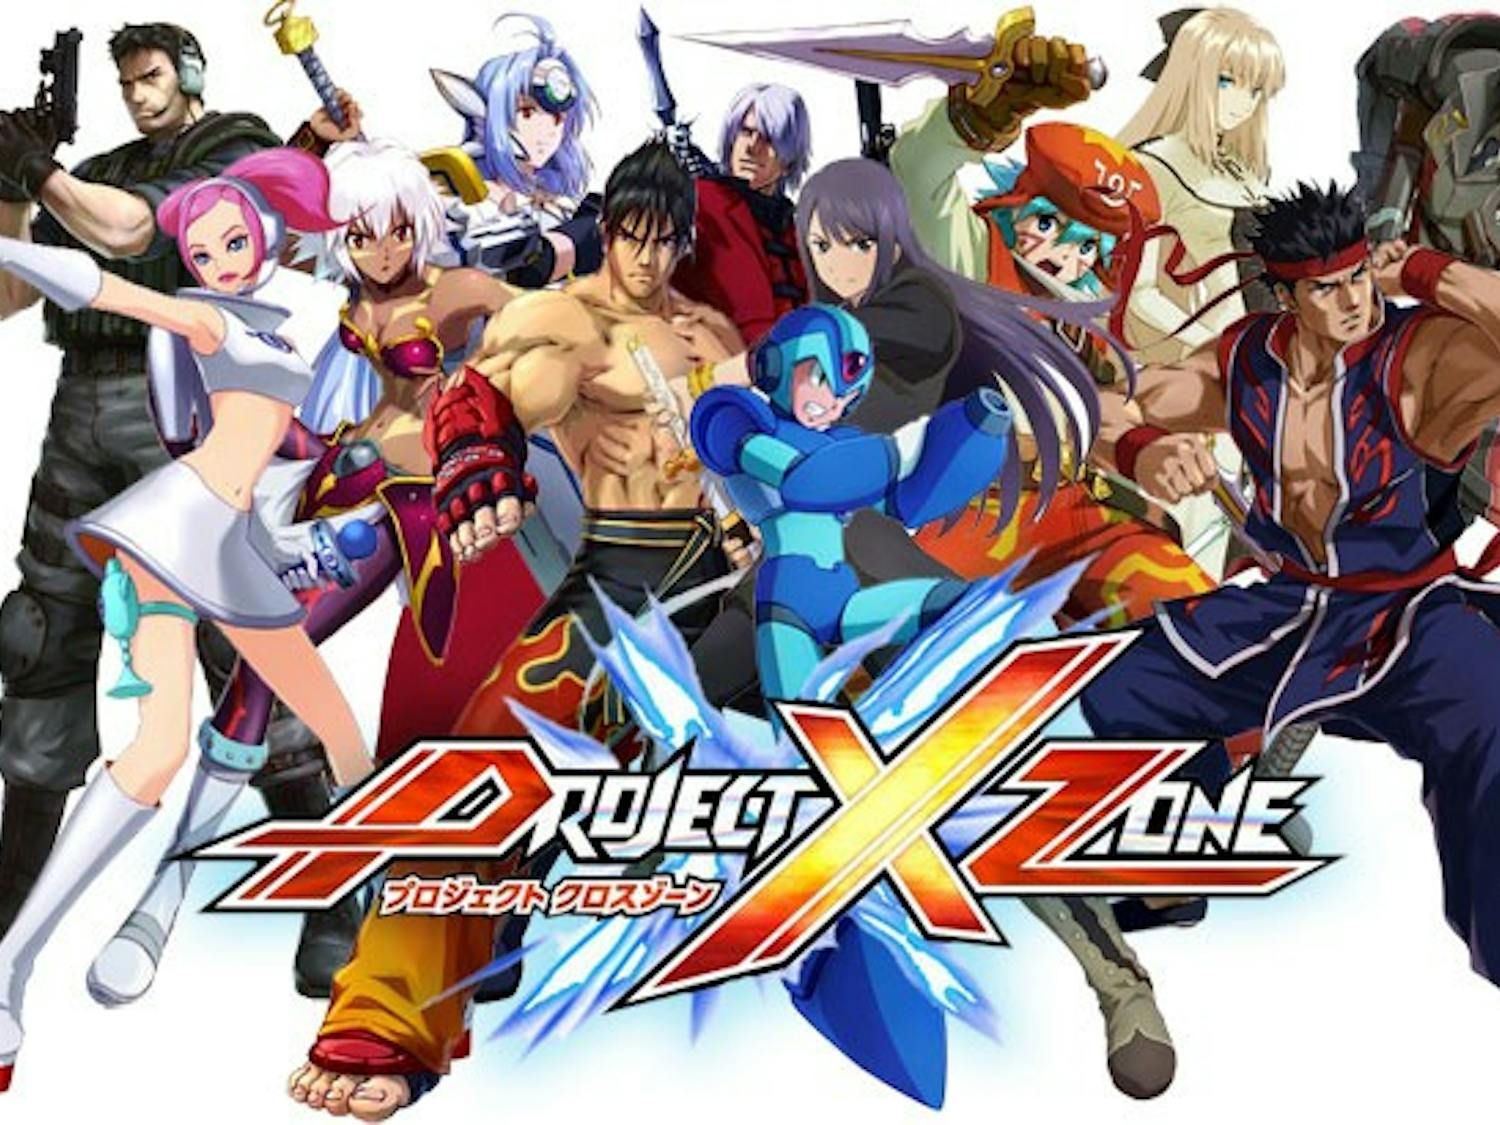 “Project X Zone promises to provide gamers with some fantastic, flashy battles with some of your favorite characters. After all, who doesn’t want to see these heroes team up to save the world?” Photo courtesy Google Images